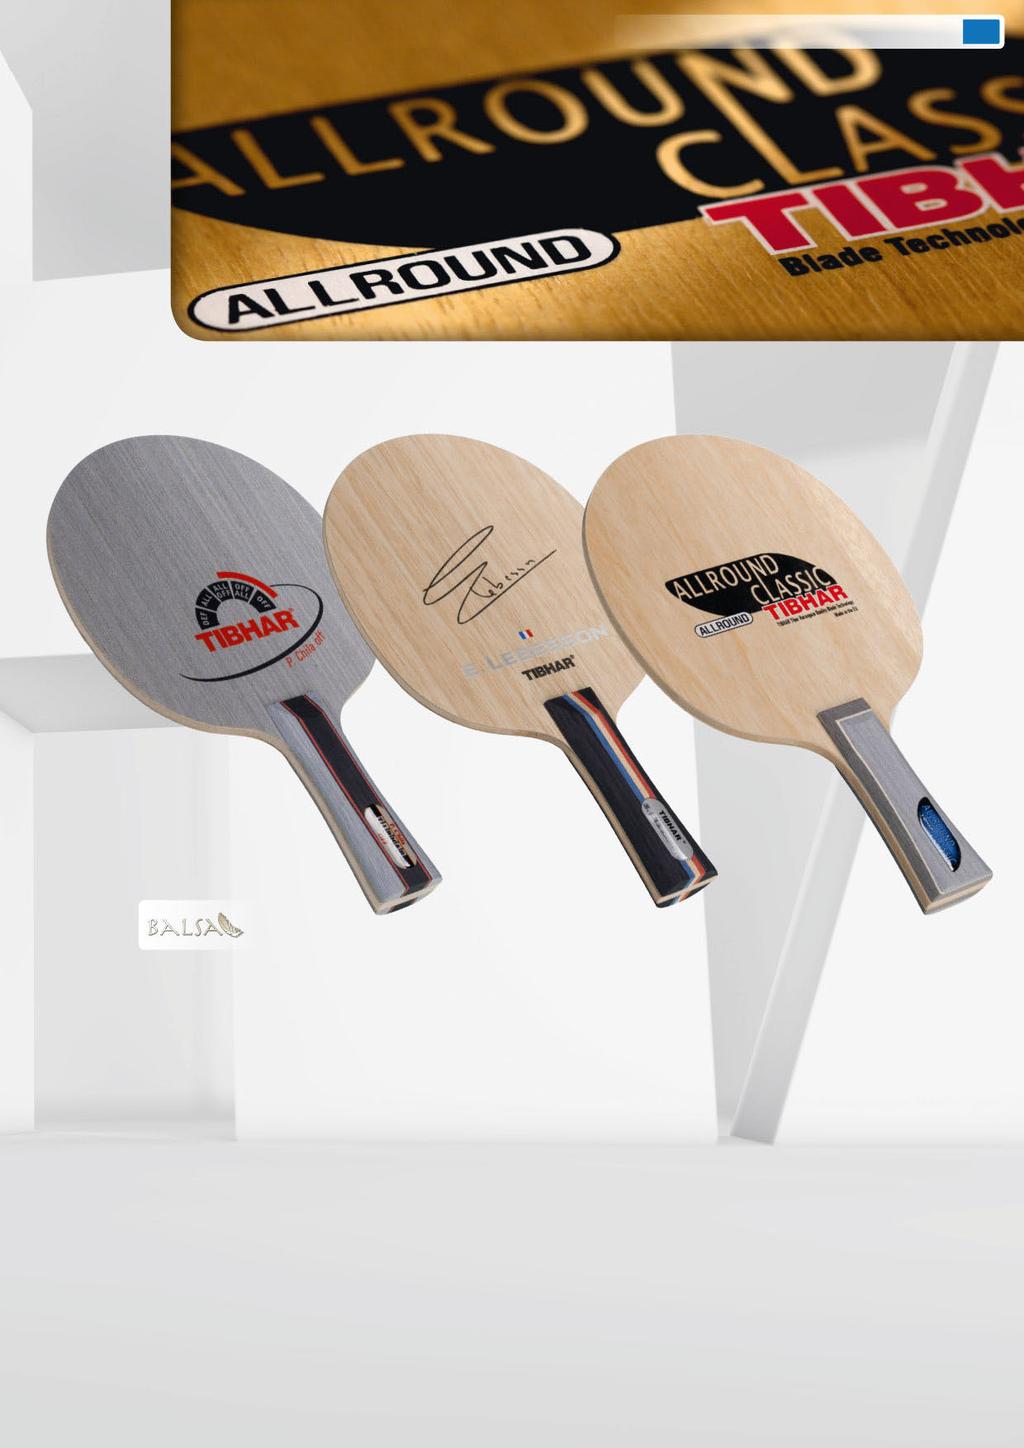 BLADES 43 CHILA OFF The blade of the former multiple European Champion and World Cup winner impresses by its varied speed reserves. The Limba outer layers confer its perceptible power.